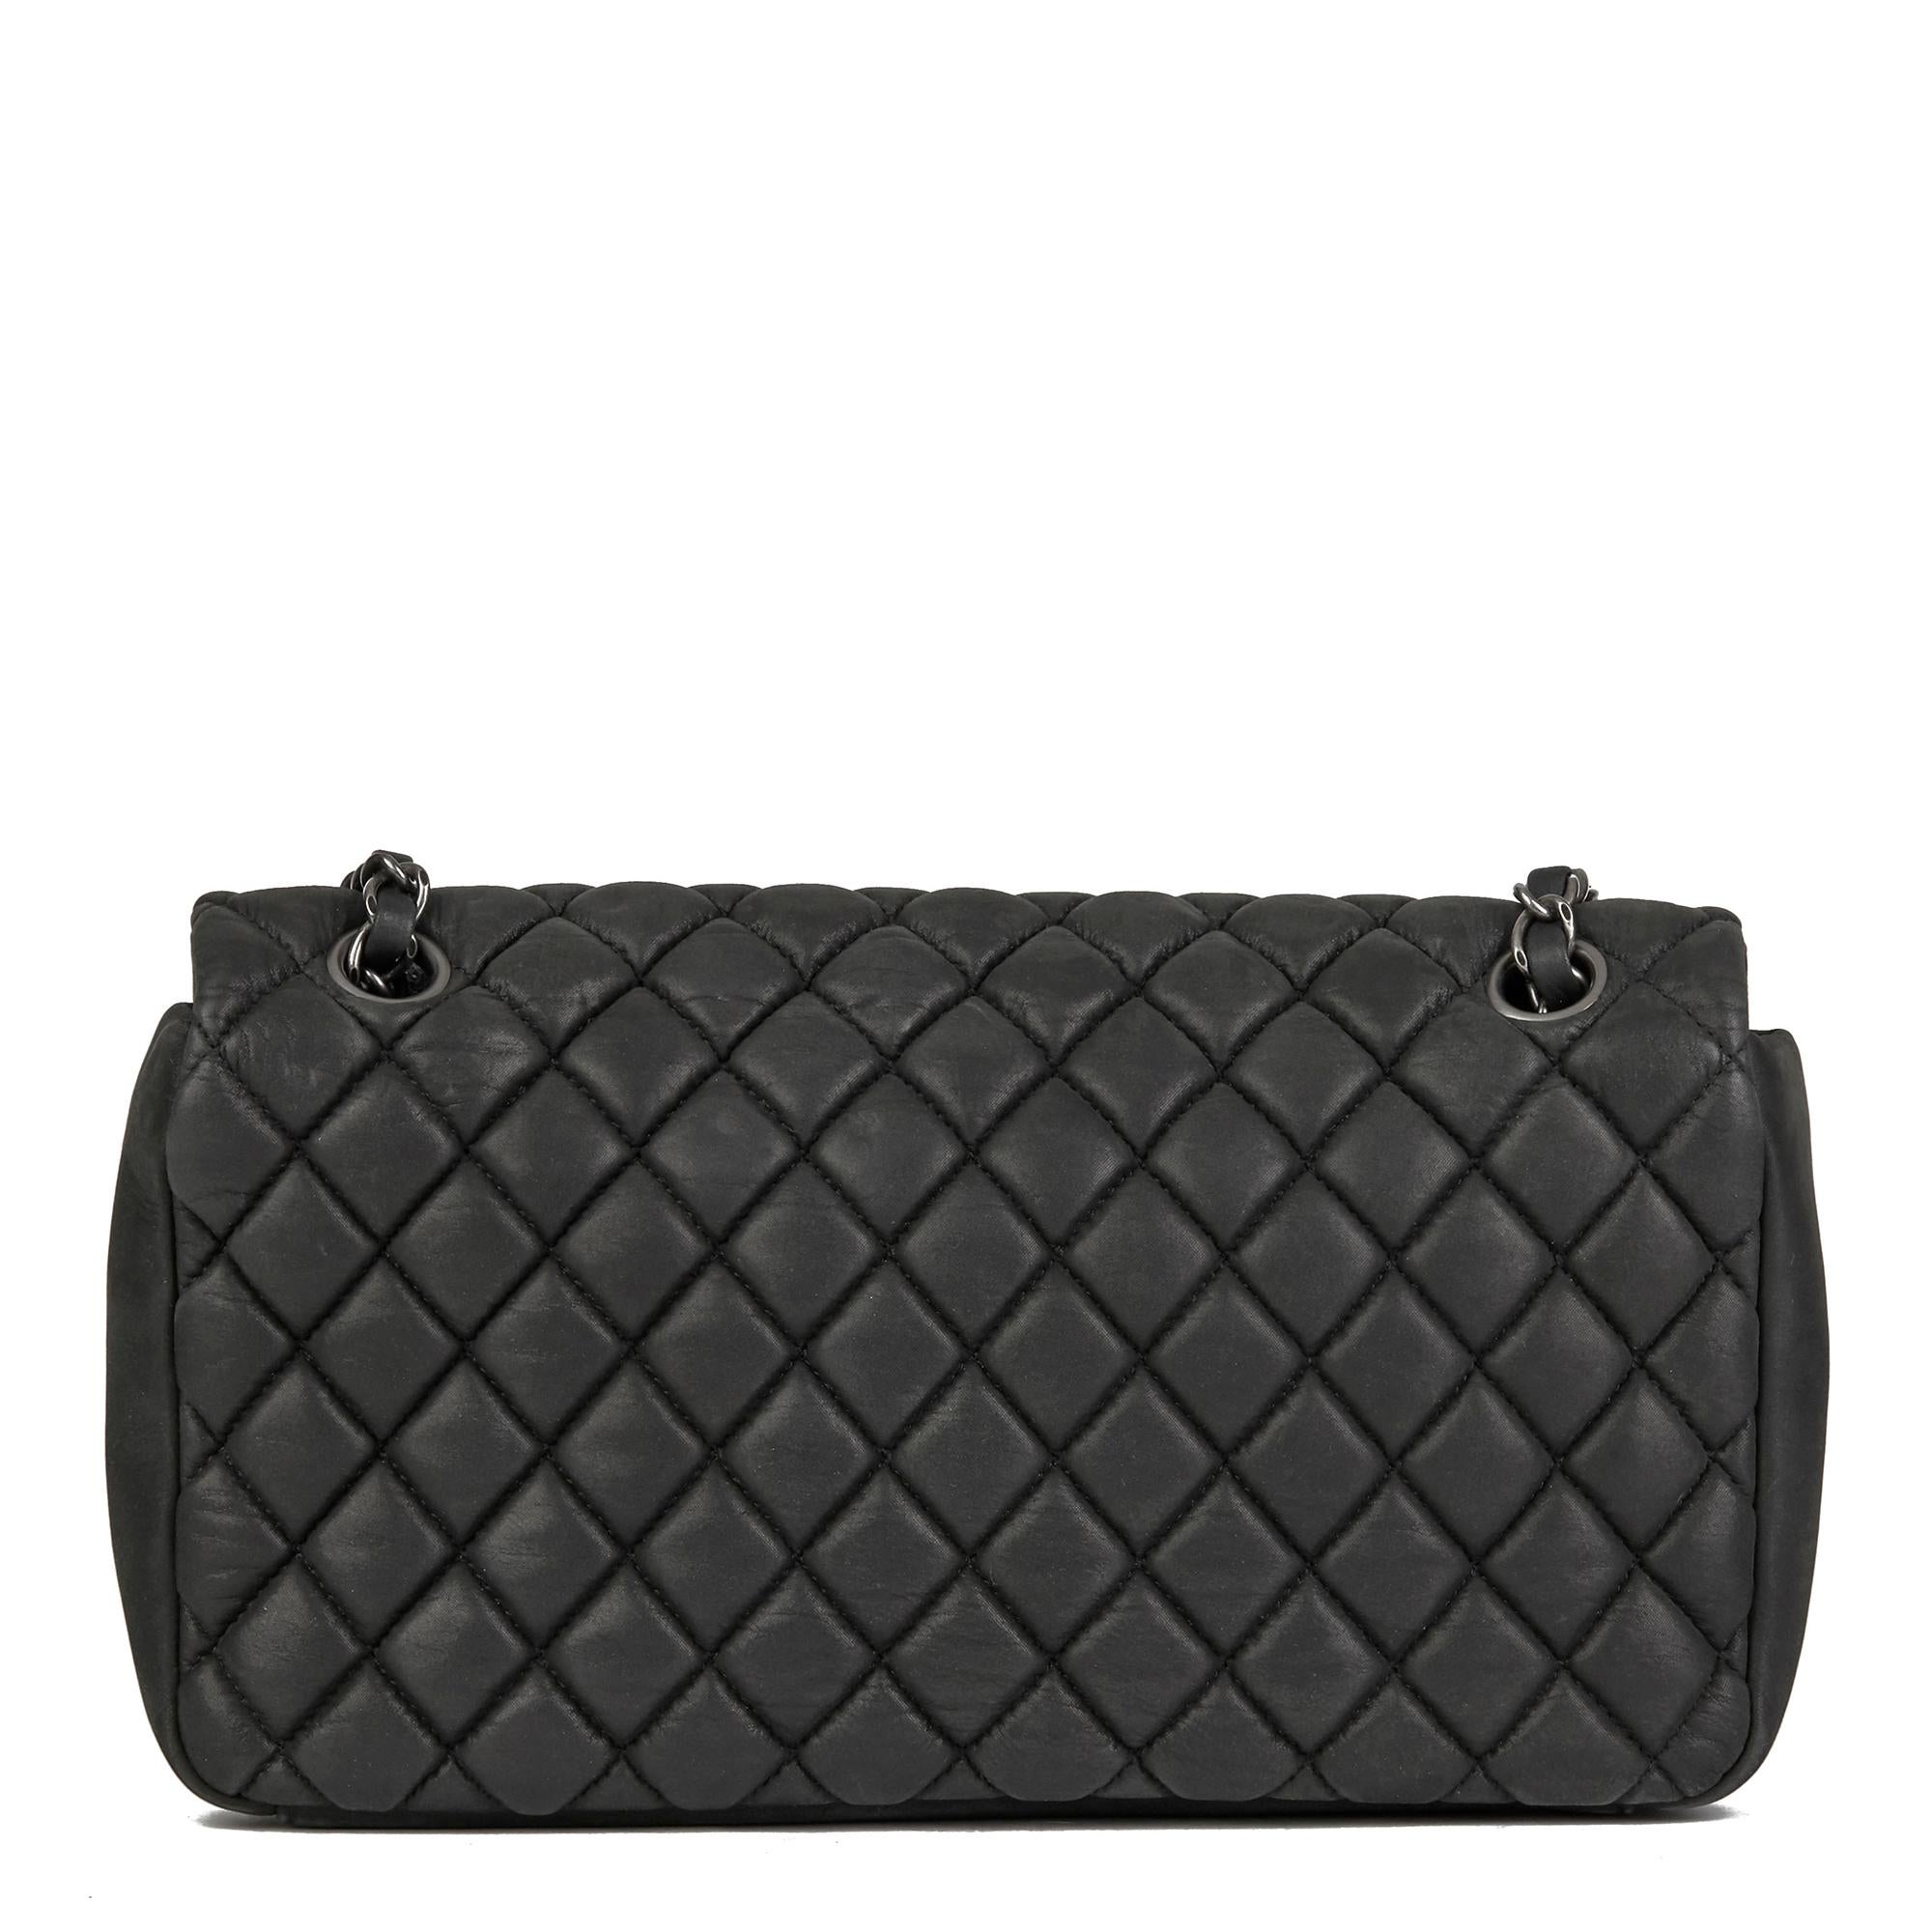 2013 Chanel Dark Grey Bubble Quilted Velvet Calfskin Small Bubble Flap Bag In Excellent Condition In Bishop's Stortford, Hertfordshire